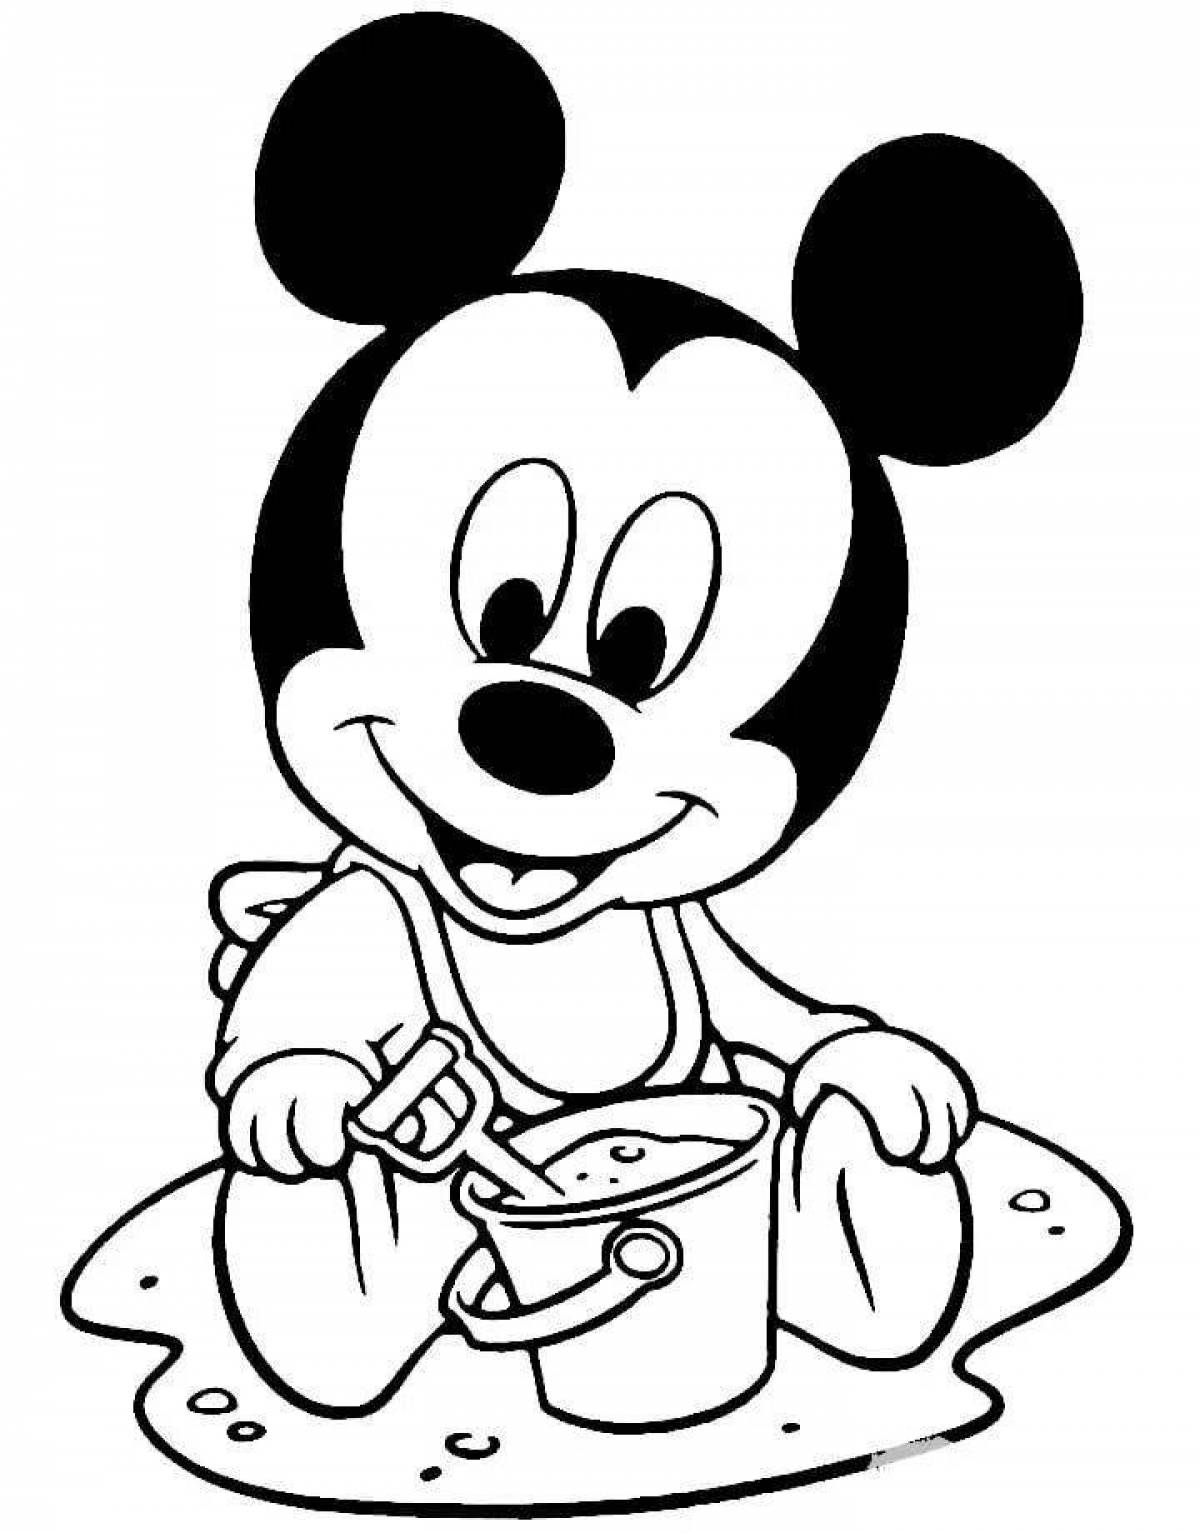 Mickey mouse for kids #13